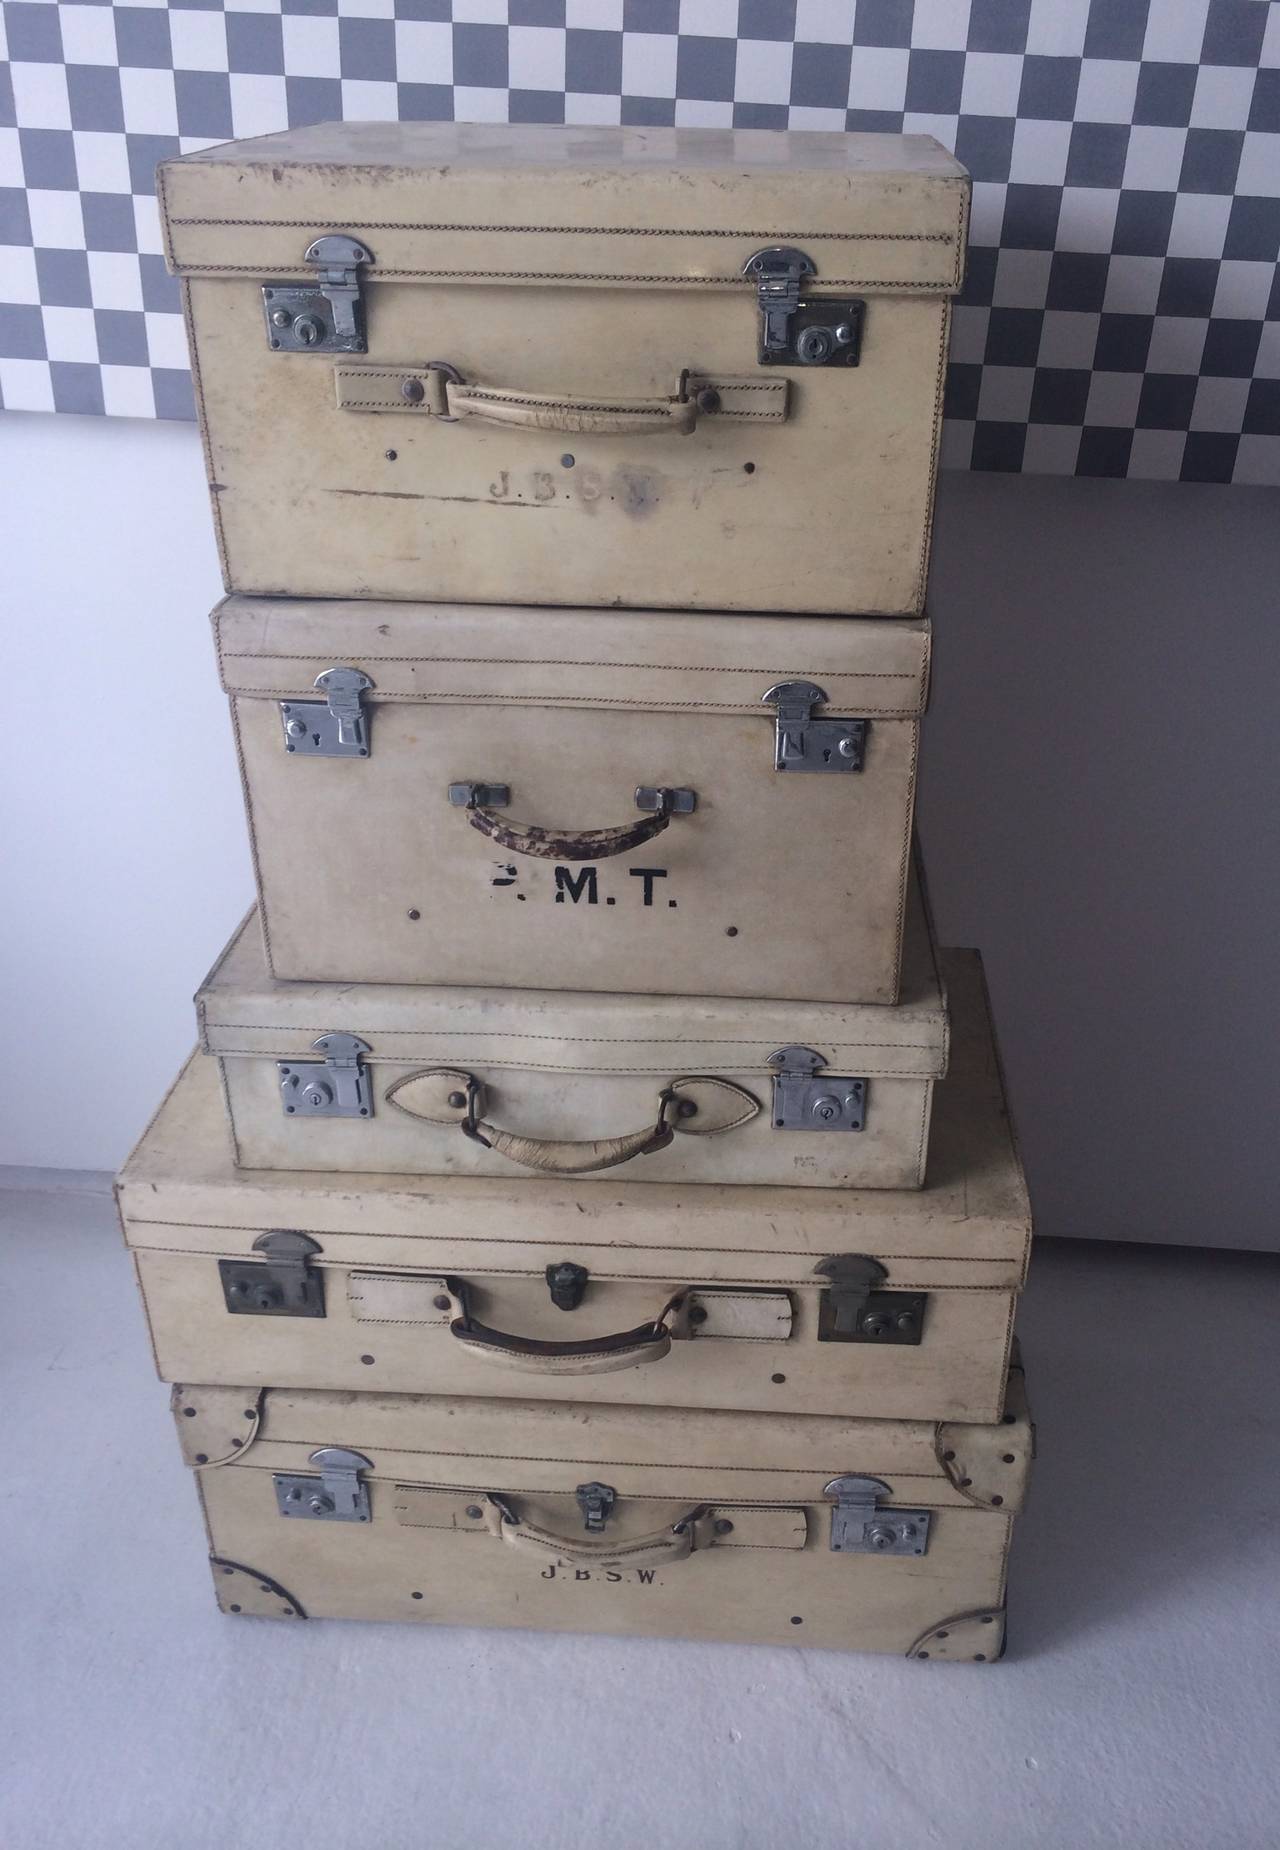 Most unique set of Drew & Son Picadilly (Mortar) Pigskin luggage, 1920s. Ralph Lauren's favorite luggage.

Dimensions:
30